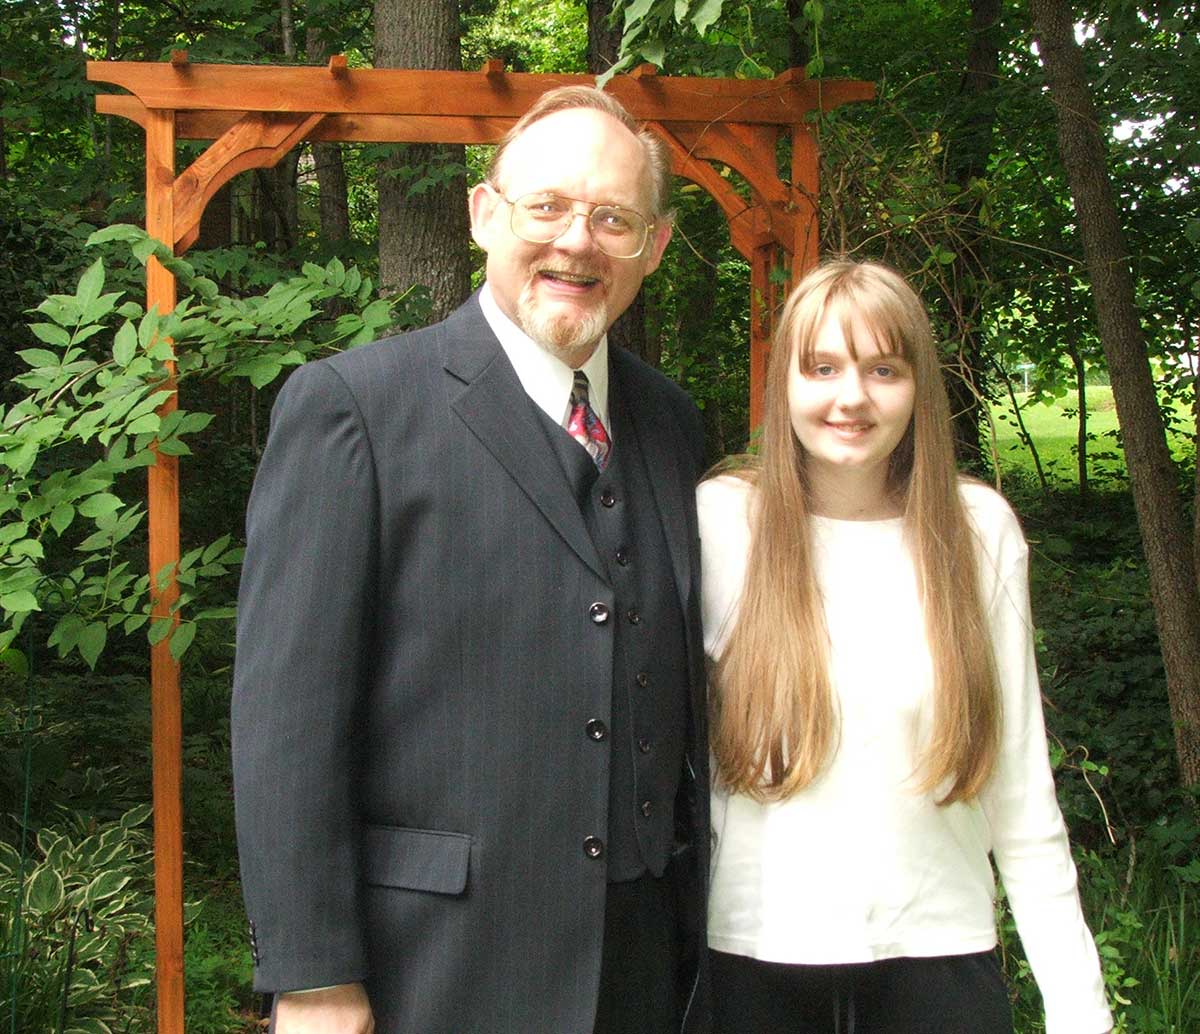 John and Abby Jackman in 2009 - before the onset of ME/CFS